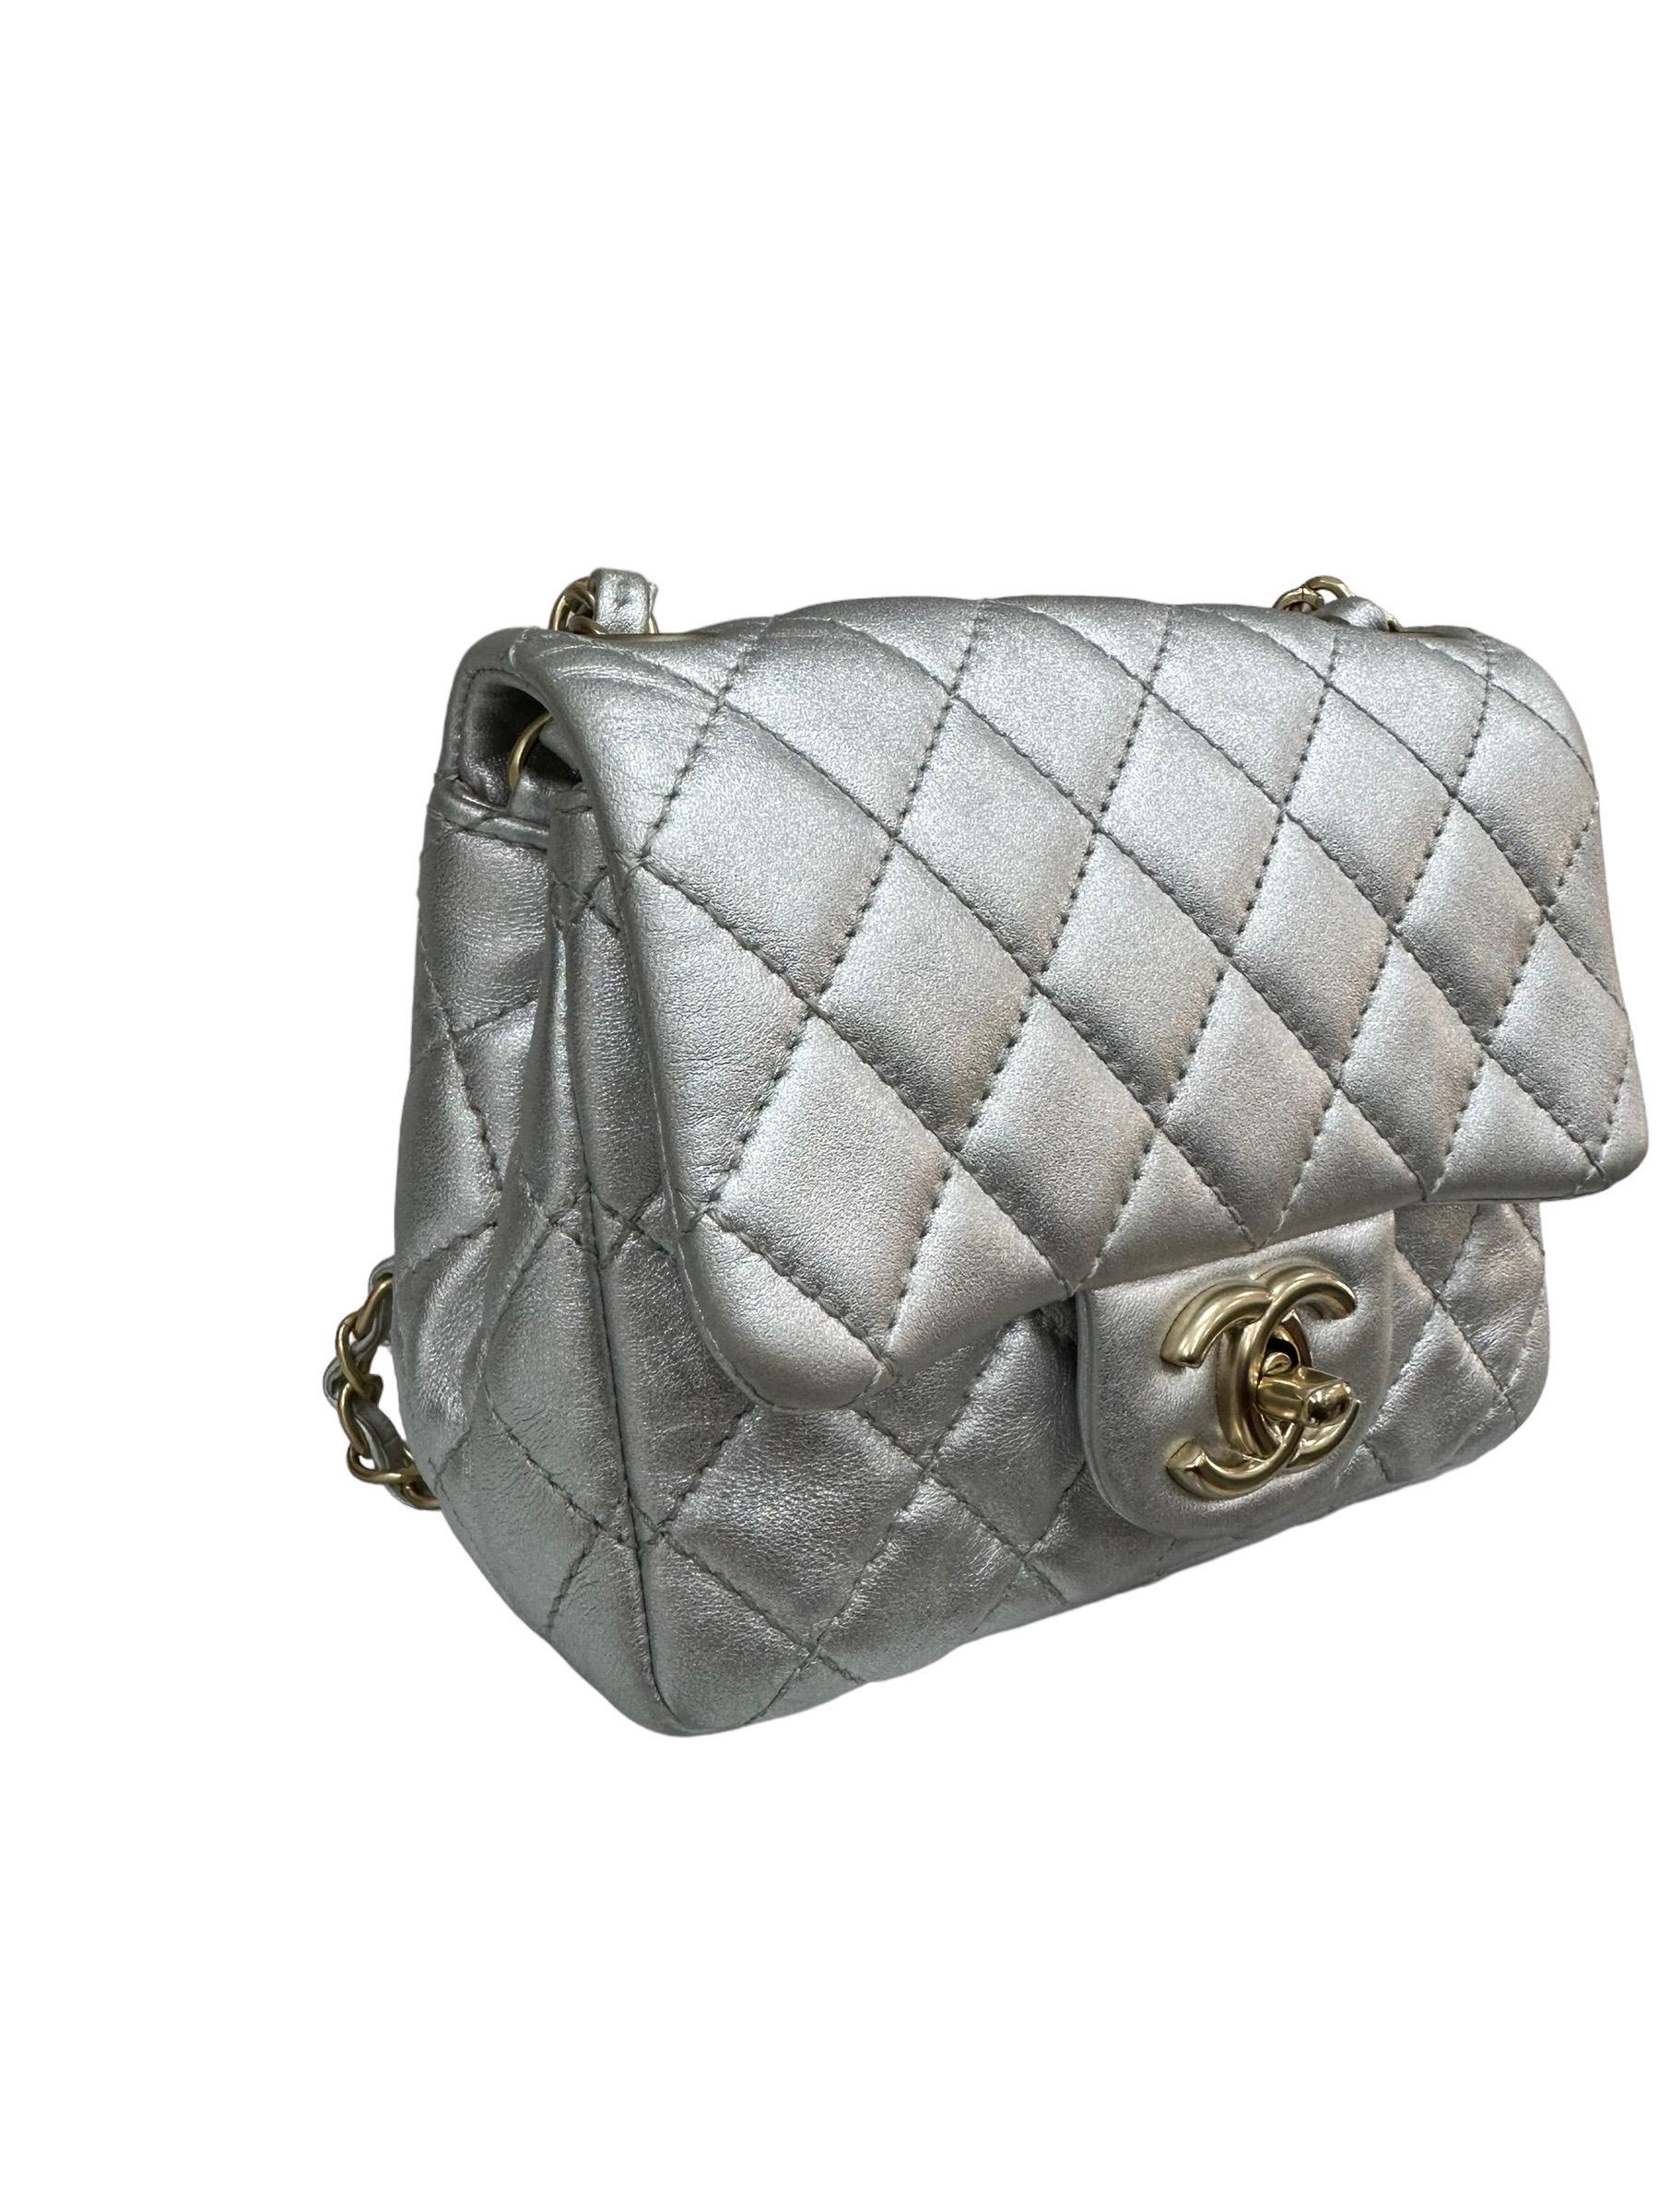 Chanel signed bag, Mini Flap model, made in silver leather with golden hardware. Equipped with a flap with CC logo twist lock, internally lined in silver leather, roomy for the essentials. Equipped with a braided leather and chain shoulder strap and